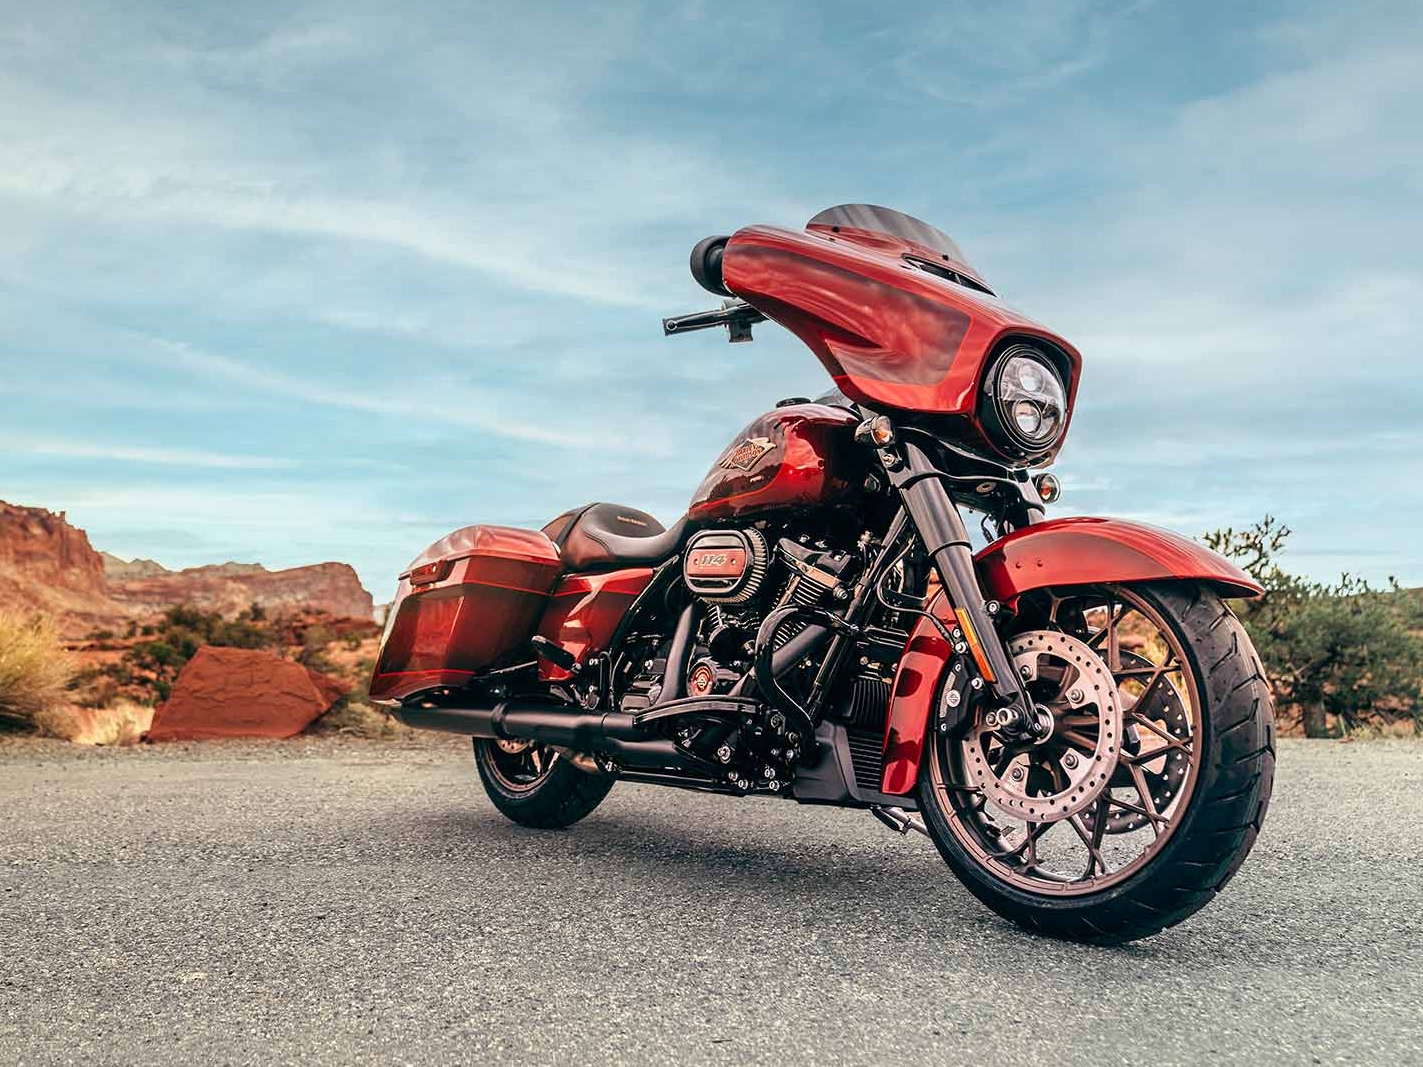 HARLEY-DAVIDSON KICKS OFF 120TH ANNIVERSARY WITH REVEAL OF 2023 MOTORCYCLES